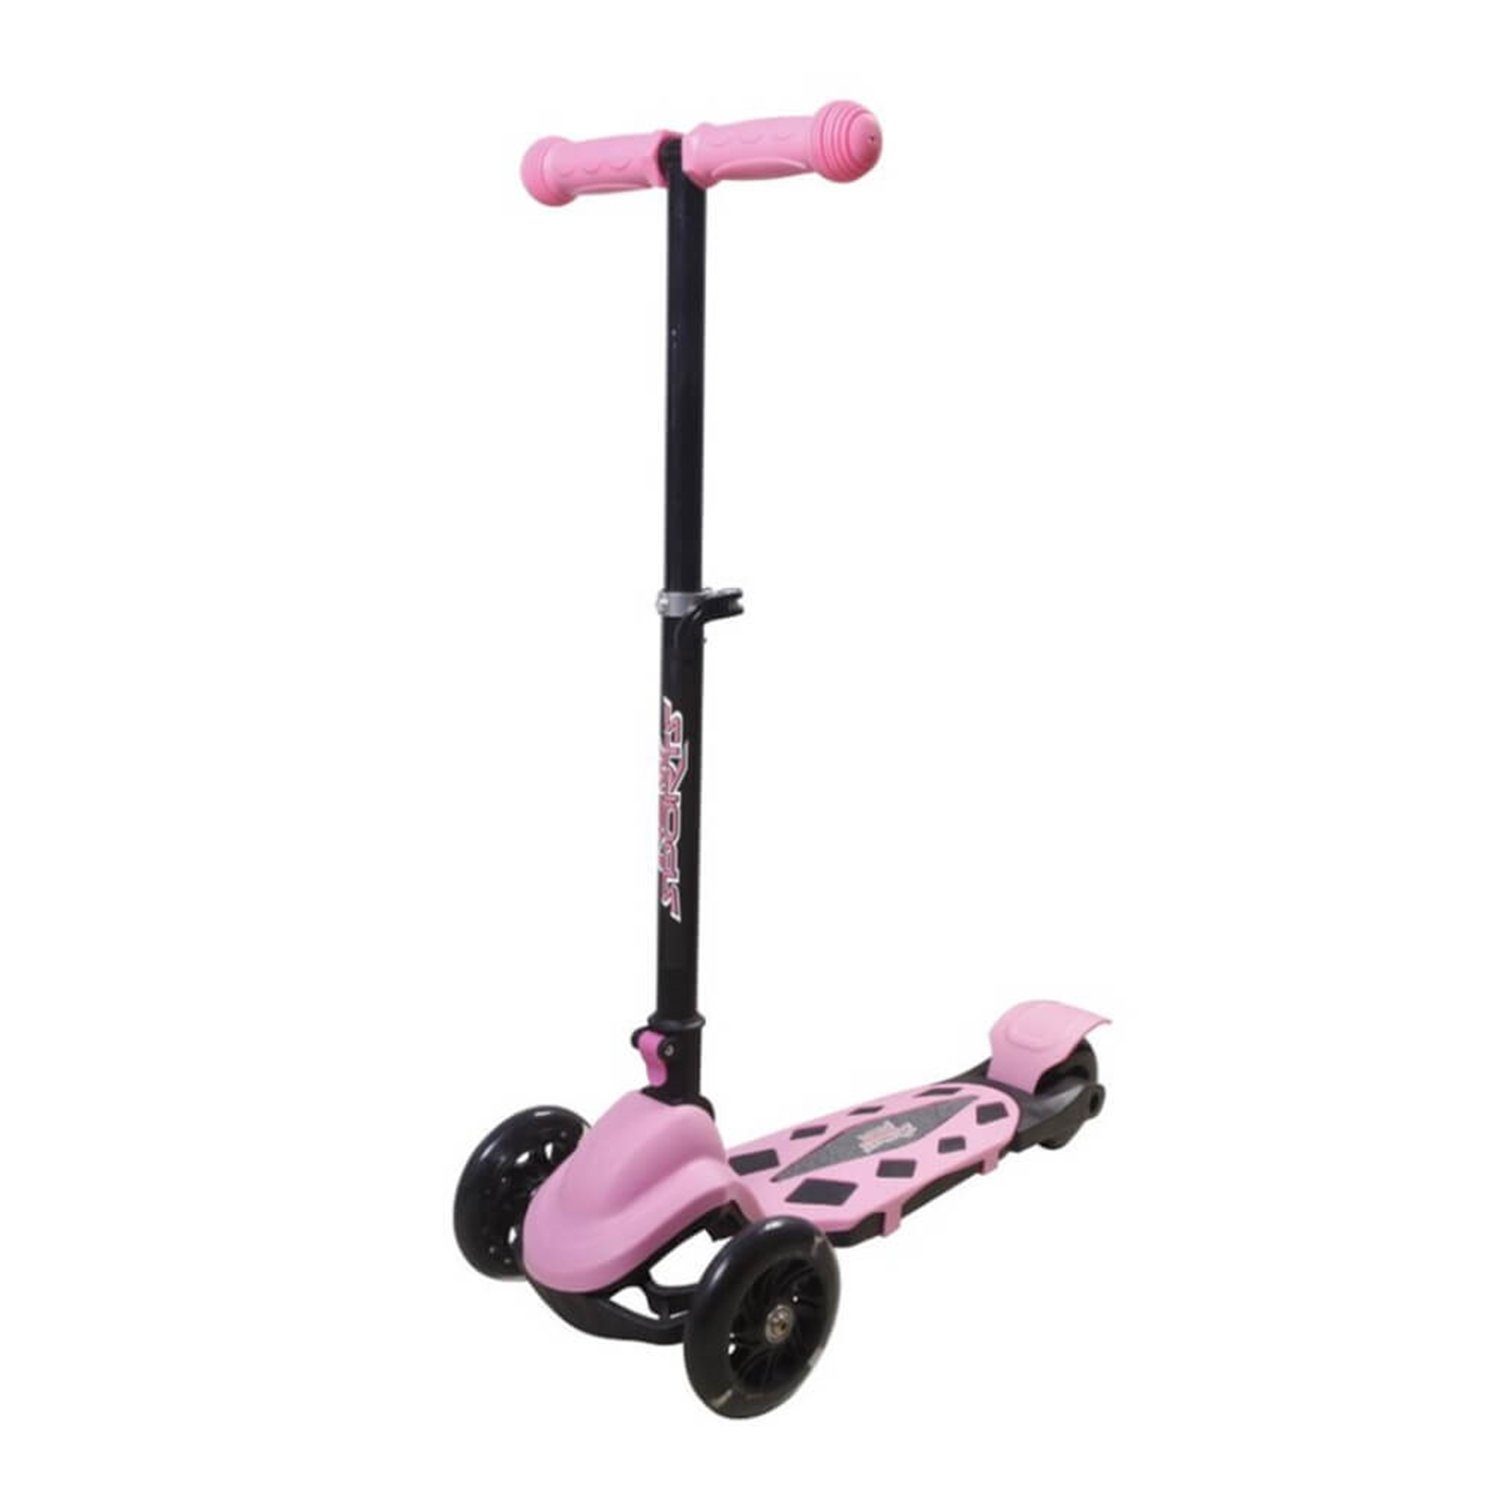 Vedes Scooter 73422019 New Sports 3-Wheel Scooter Rosa, klappbar, 110 mm